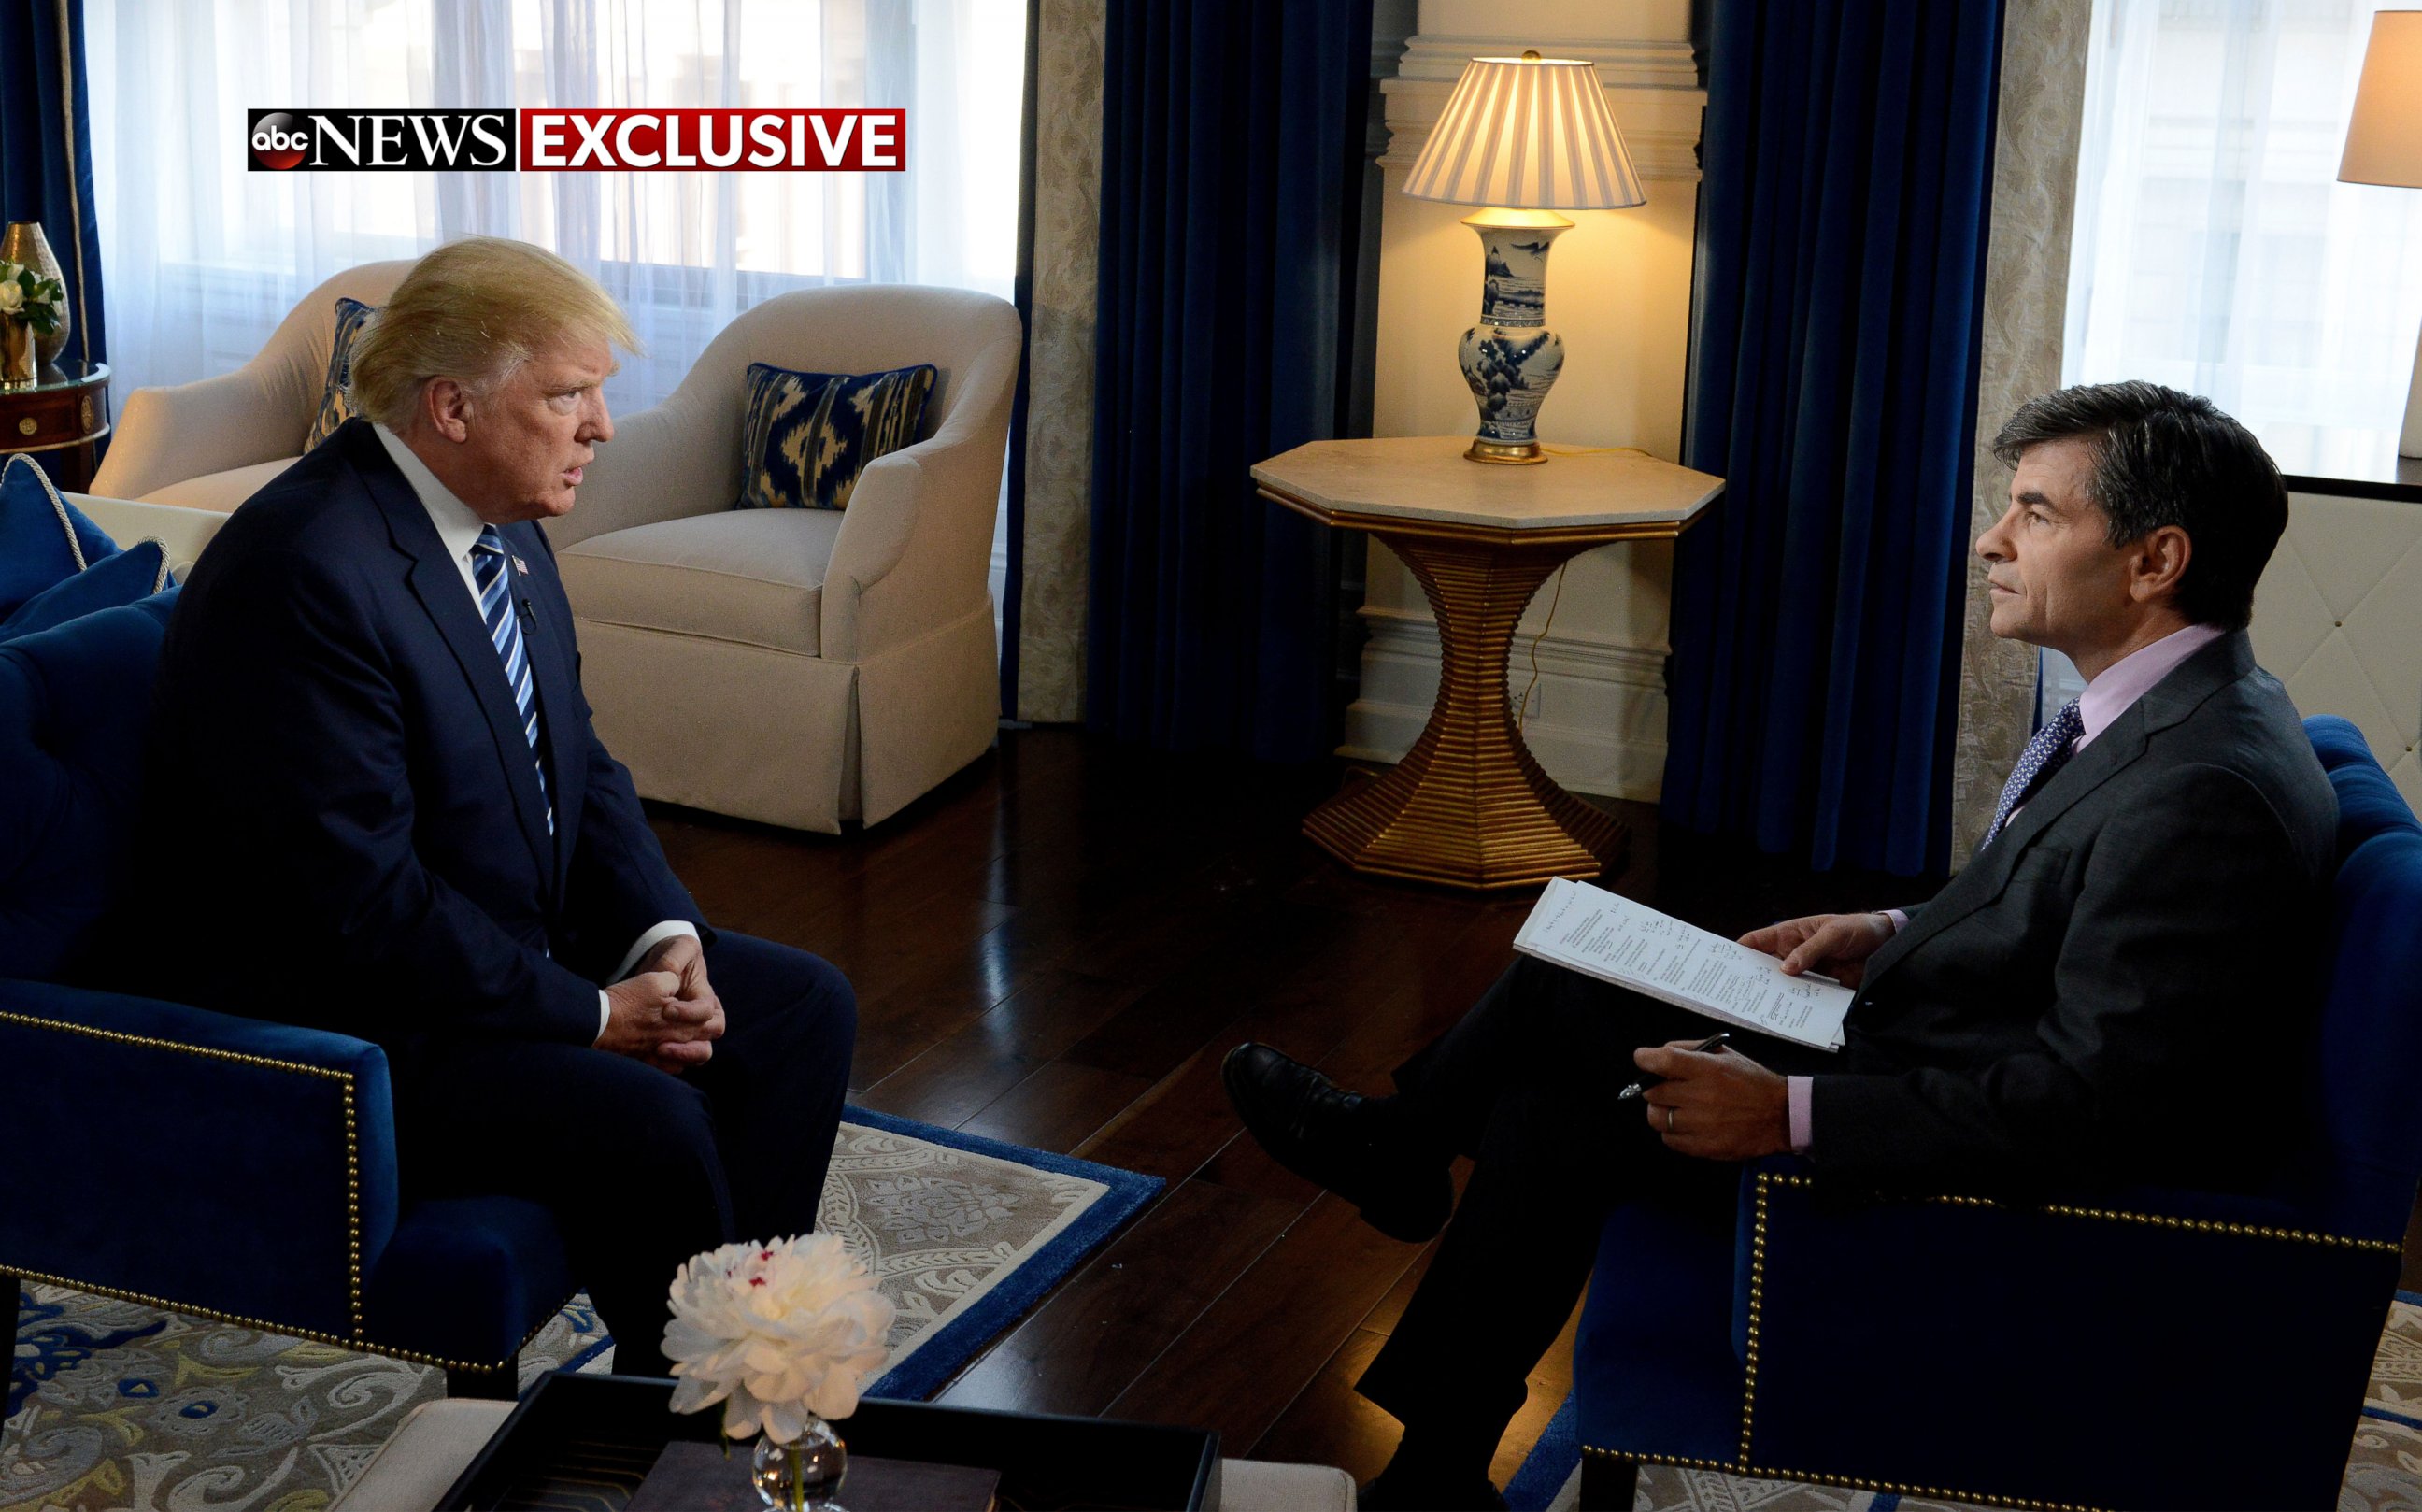 PHOTO: Donald Trump speaks to ABC News' George Stephanopoulos in an exclusive interview, Oct. 26, 2016. 